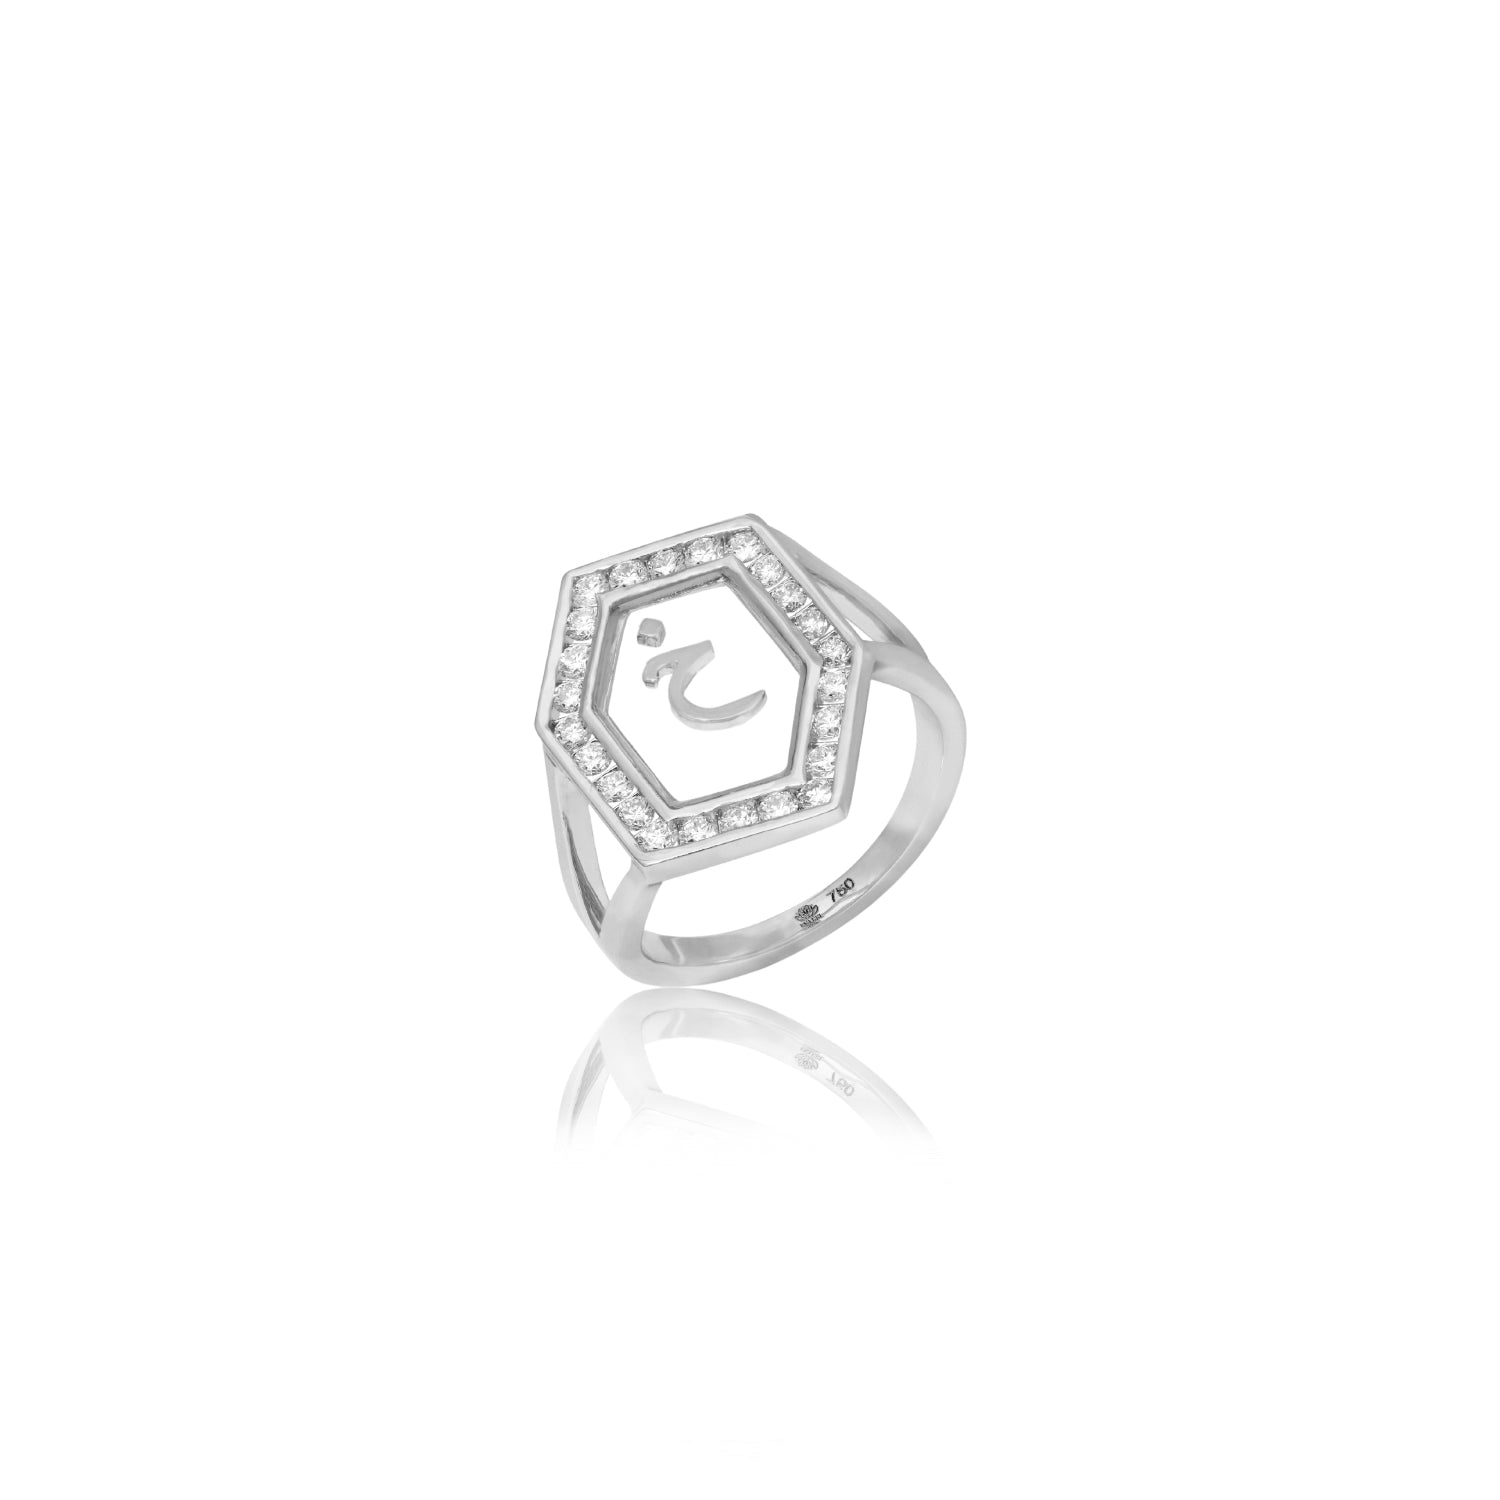 Qamoos 1.0 Letter خ Diamond Ring in White Gold